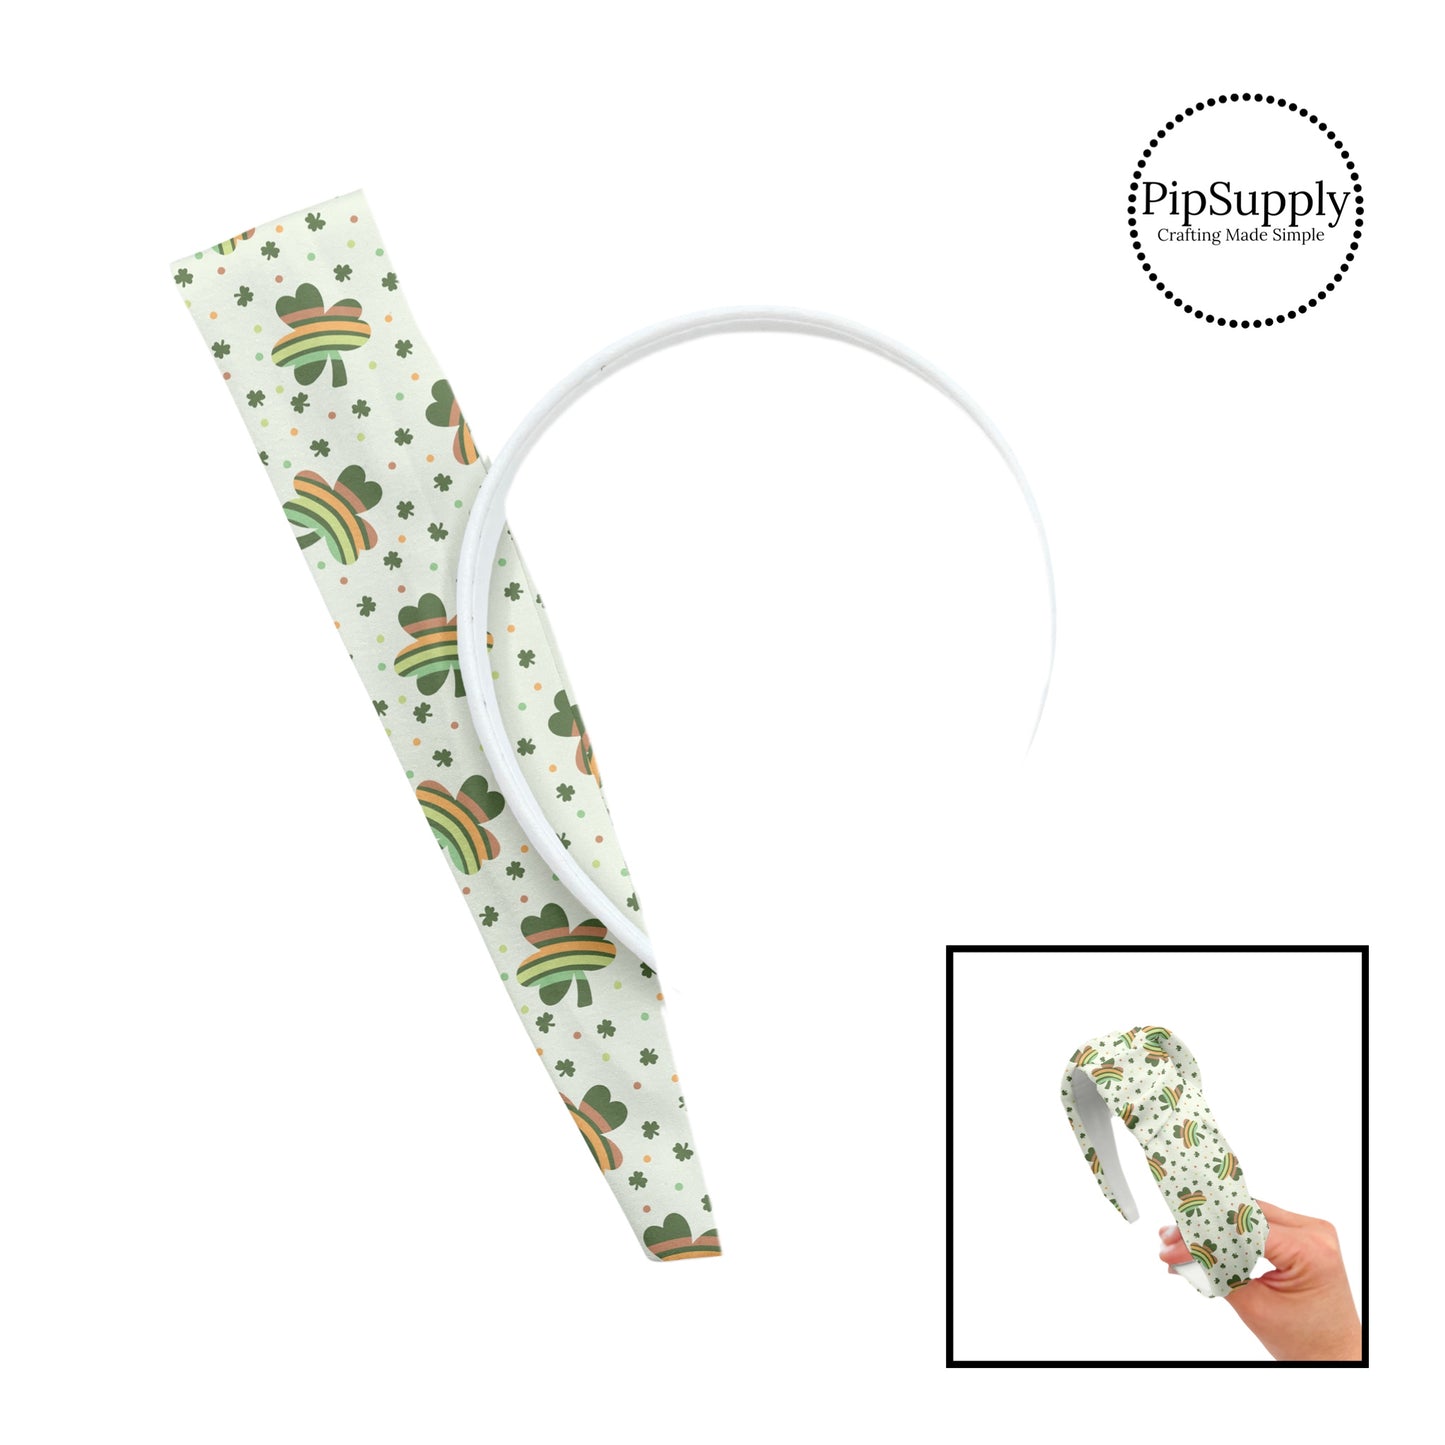 These patterned headband kits are easy to assemble and come with everything you need to make your own knotted headband. These St. Patrick's Day kits include a custom printed and sewn fabric strip and a coordinating velvet headband. This cute pattern features rainbow clovers on cream. 